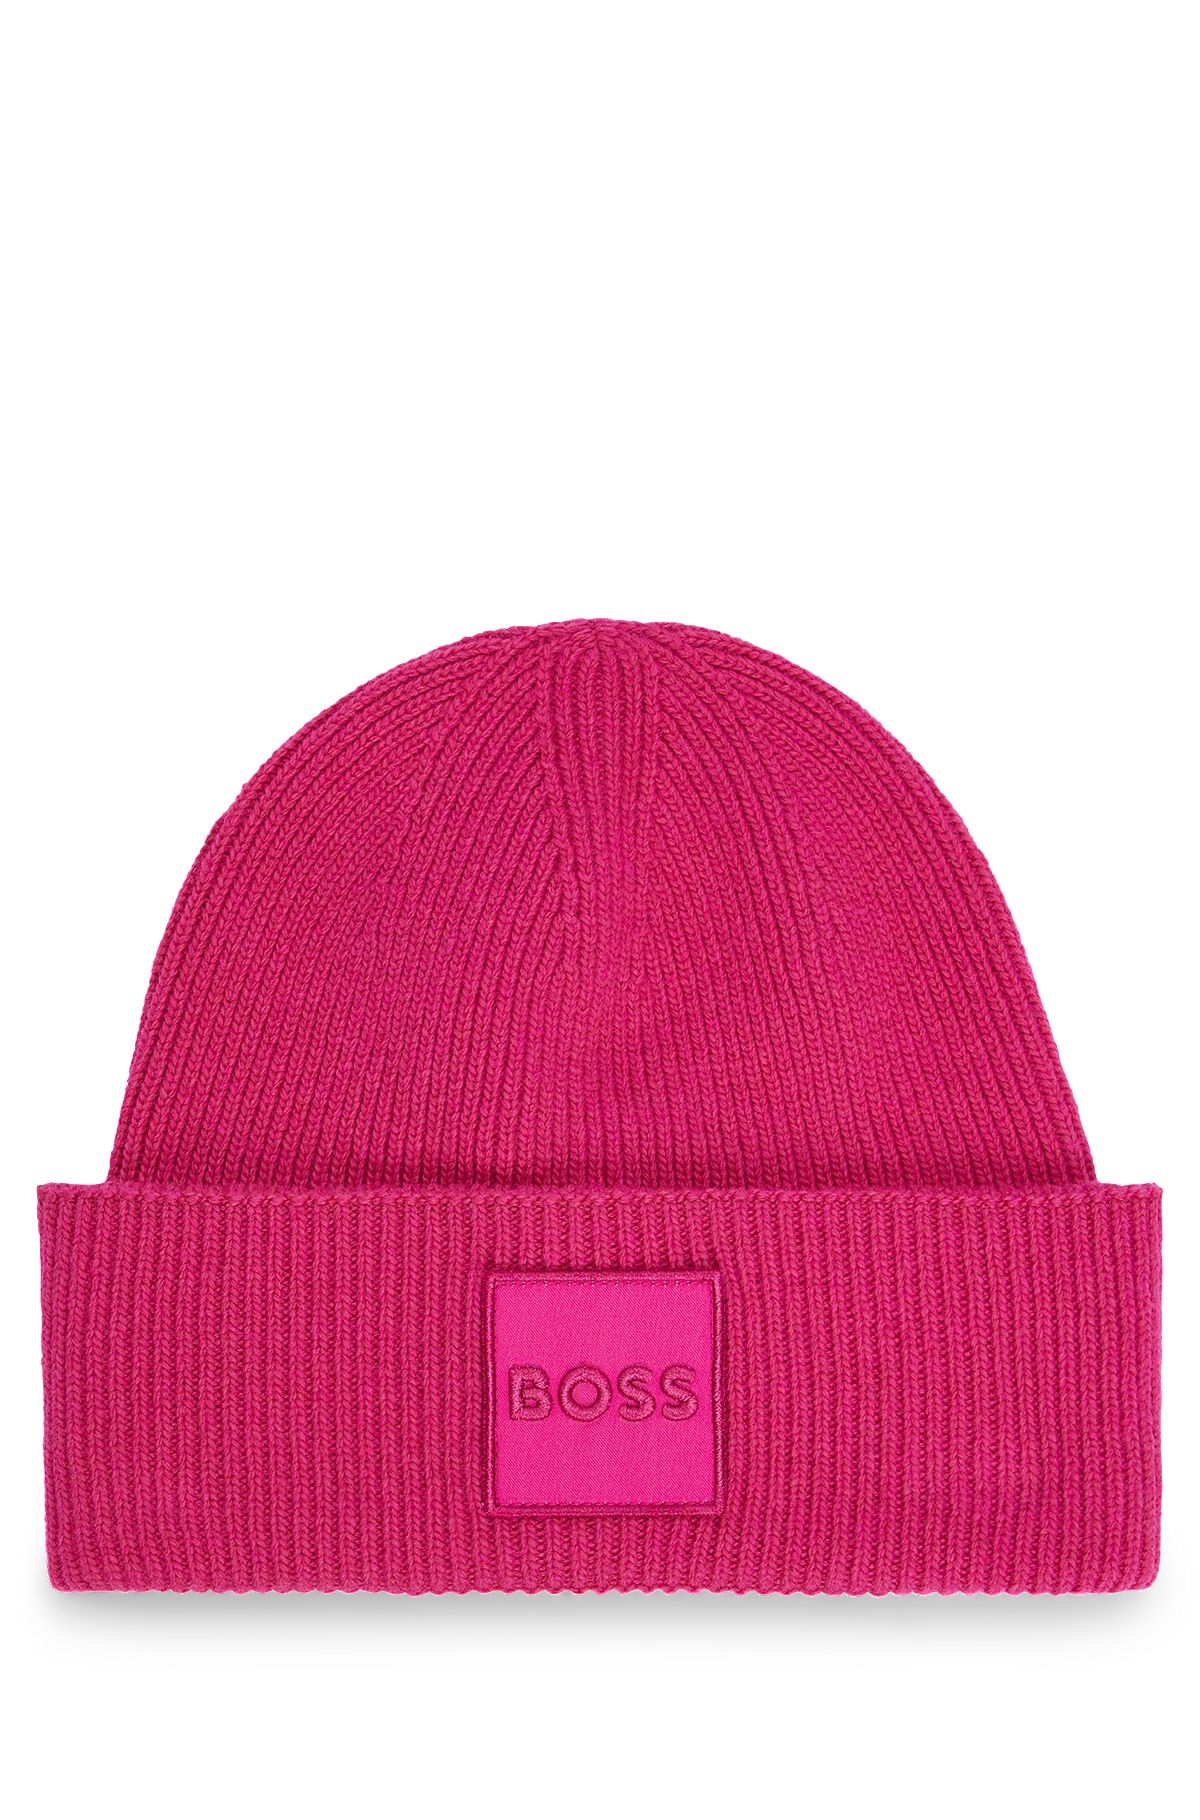 Ribbed beanie hat with tonal logo detail, Pink